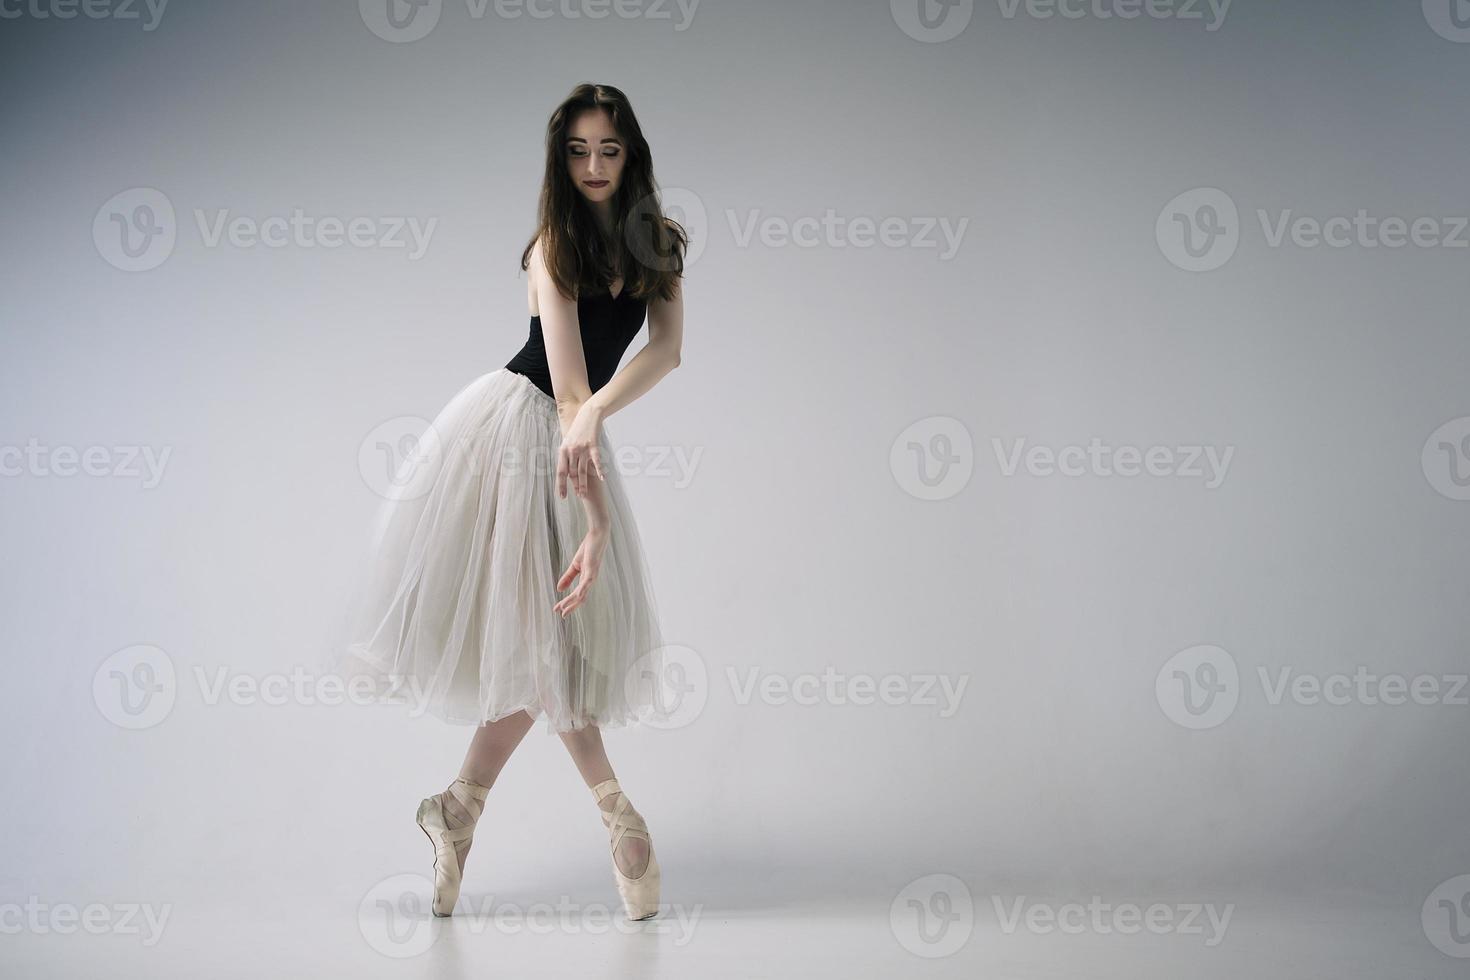 a ballerina in a bodysuit and a white skirt improvises classical and modern choreography in a photo studio